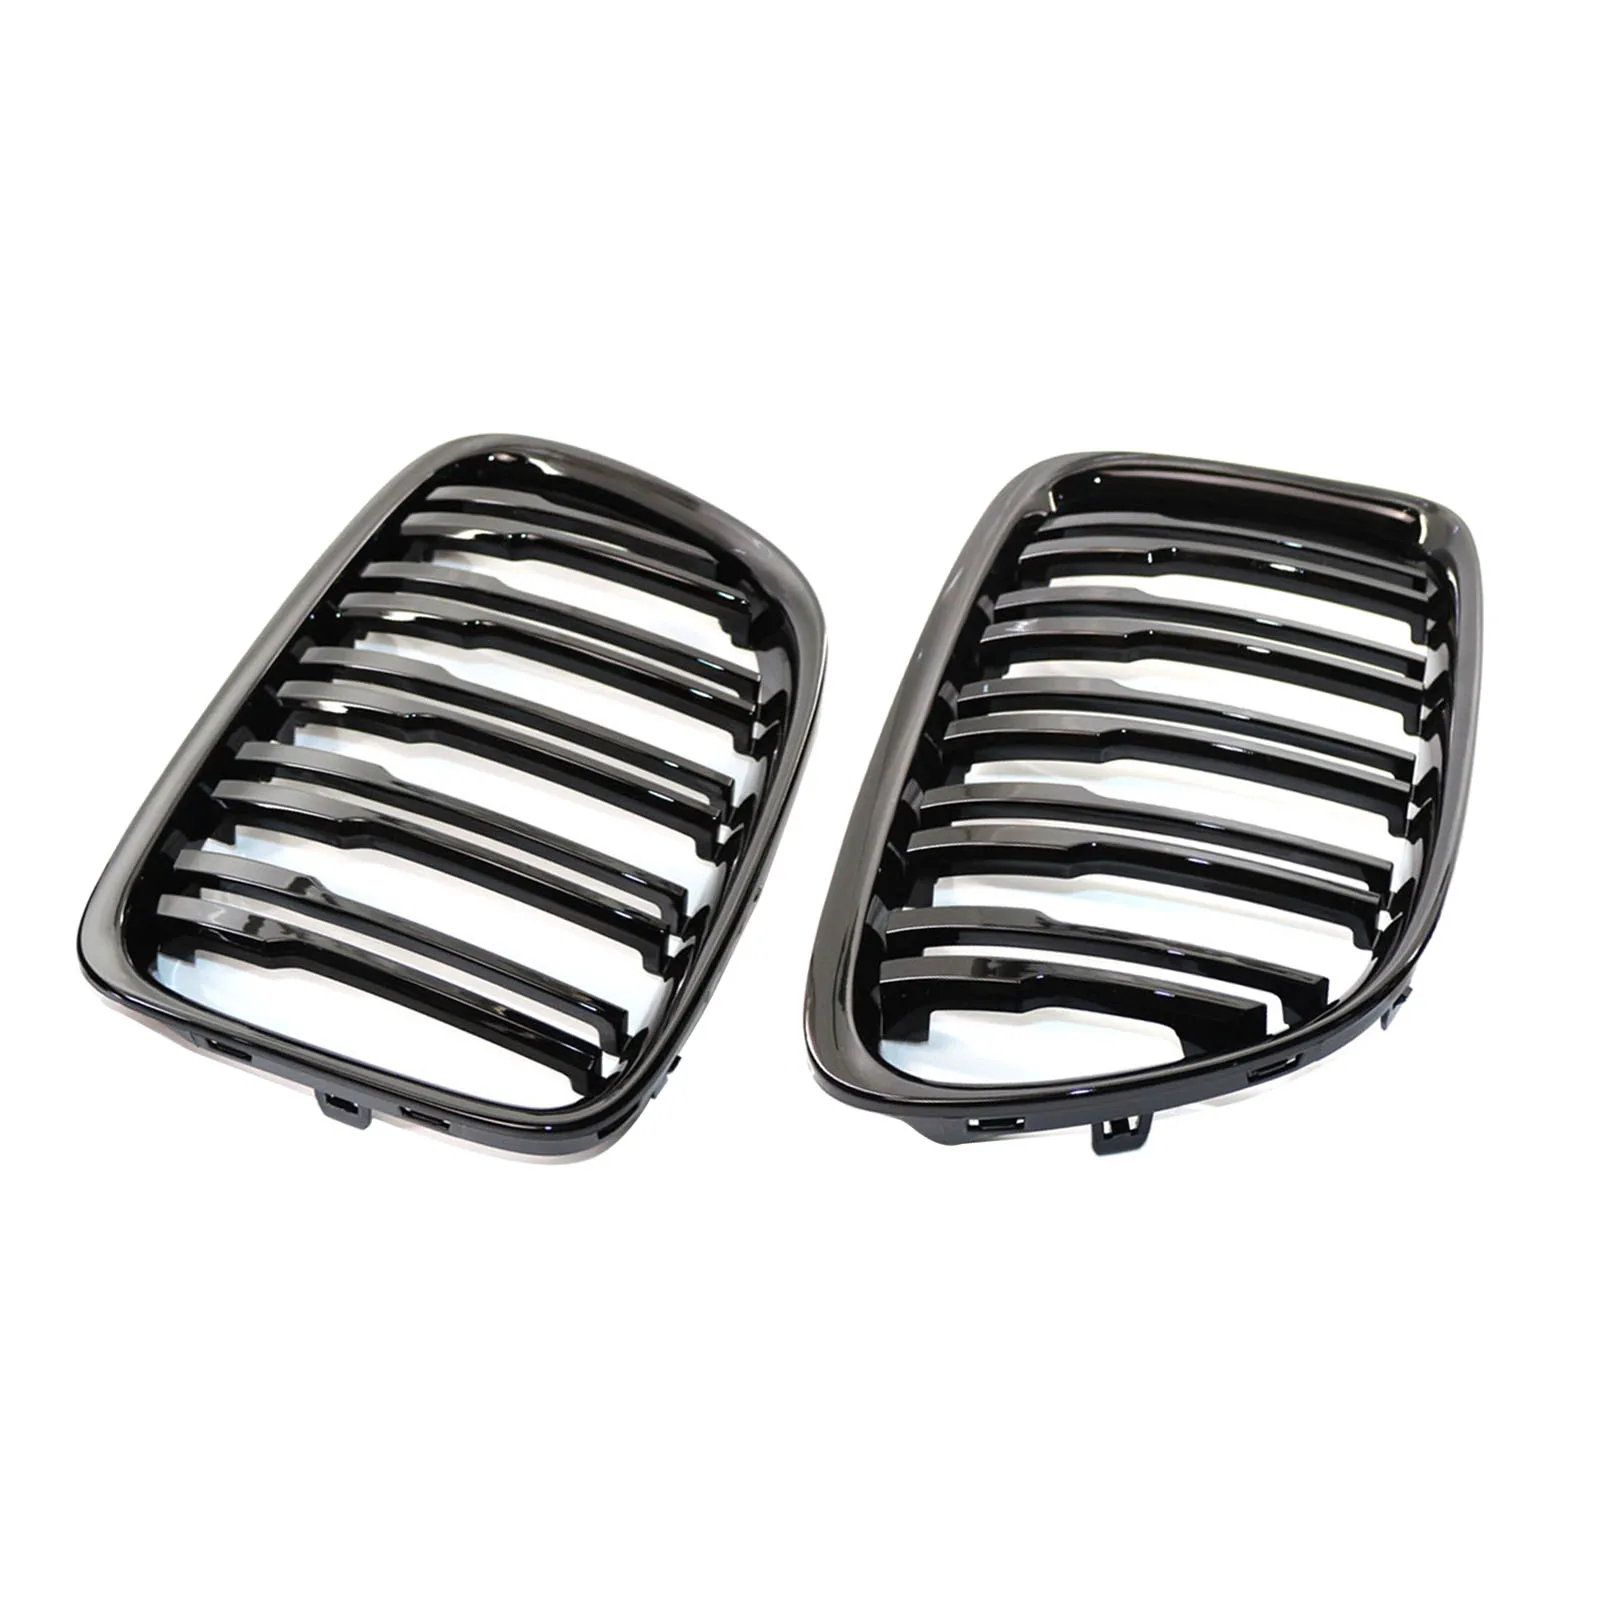 2pcs Front Grille Grill Cover Sport Hood for  X1 E84 11-16 51112993305 51112993308 51117347669 Parts Accessories